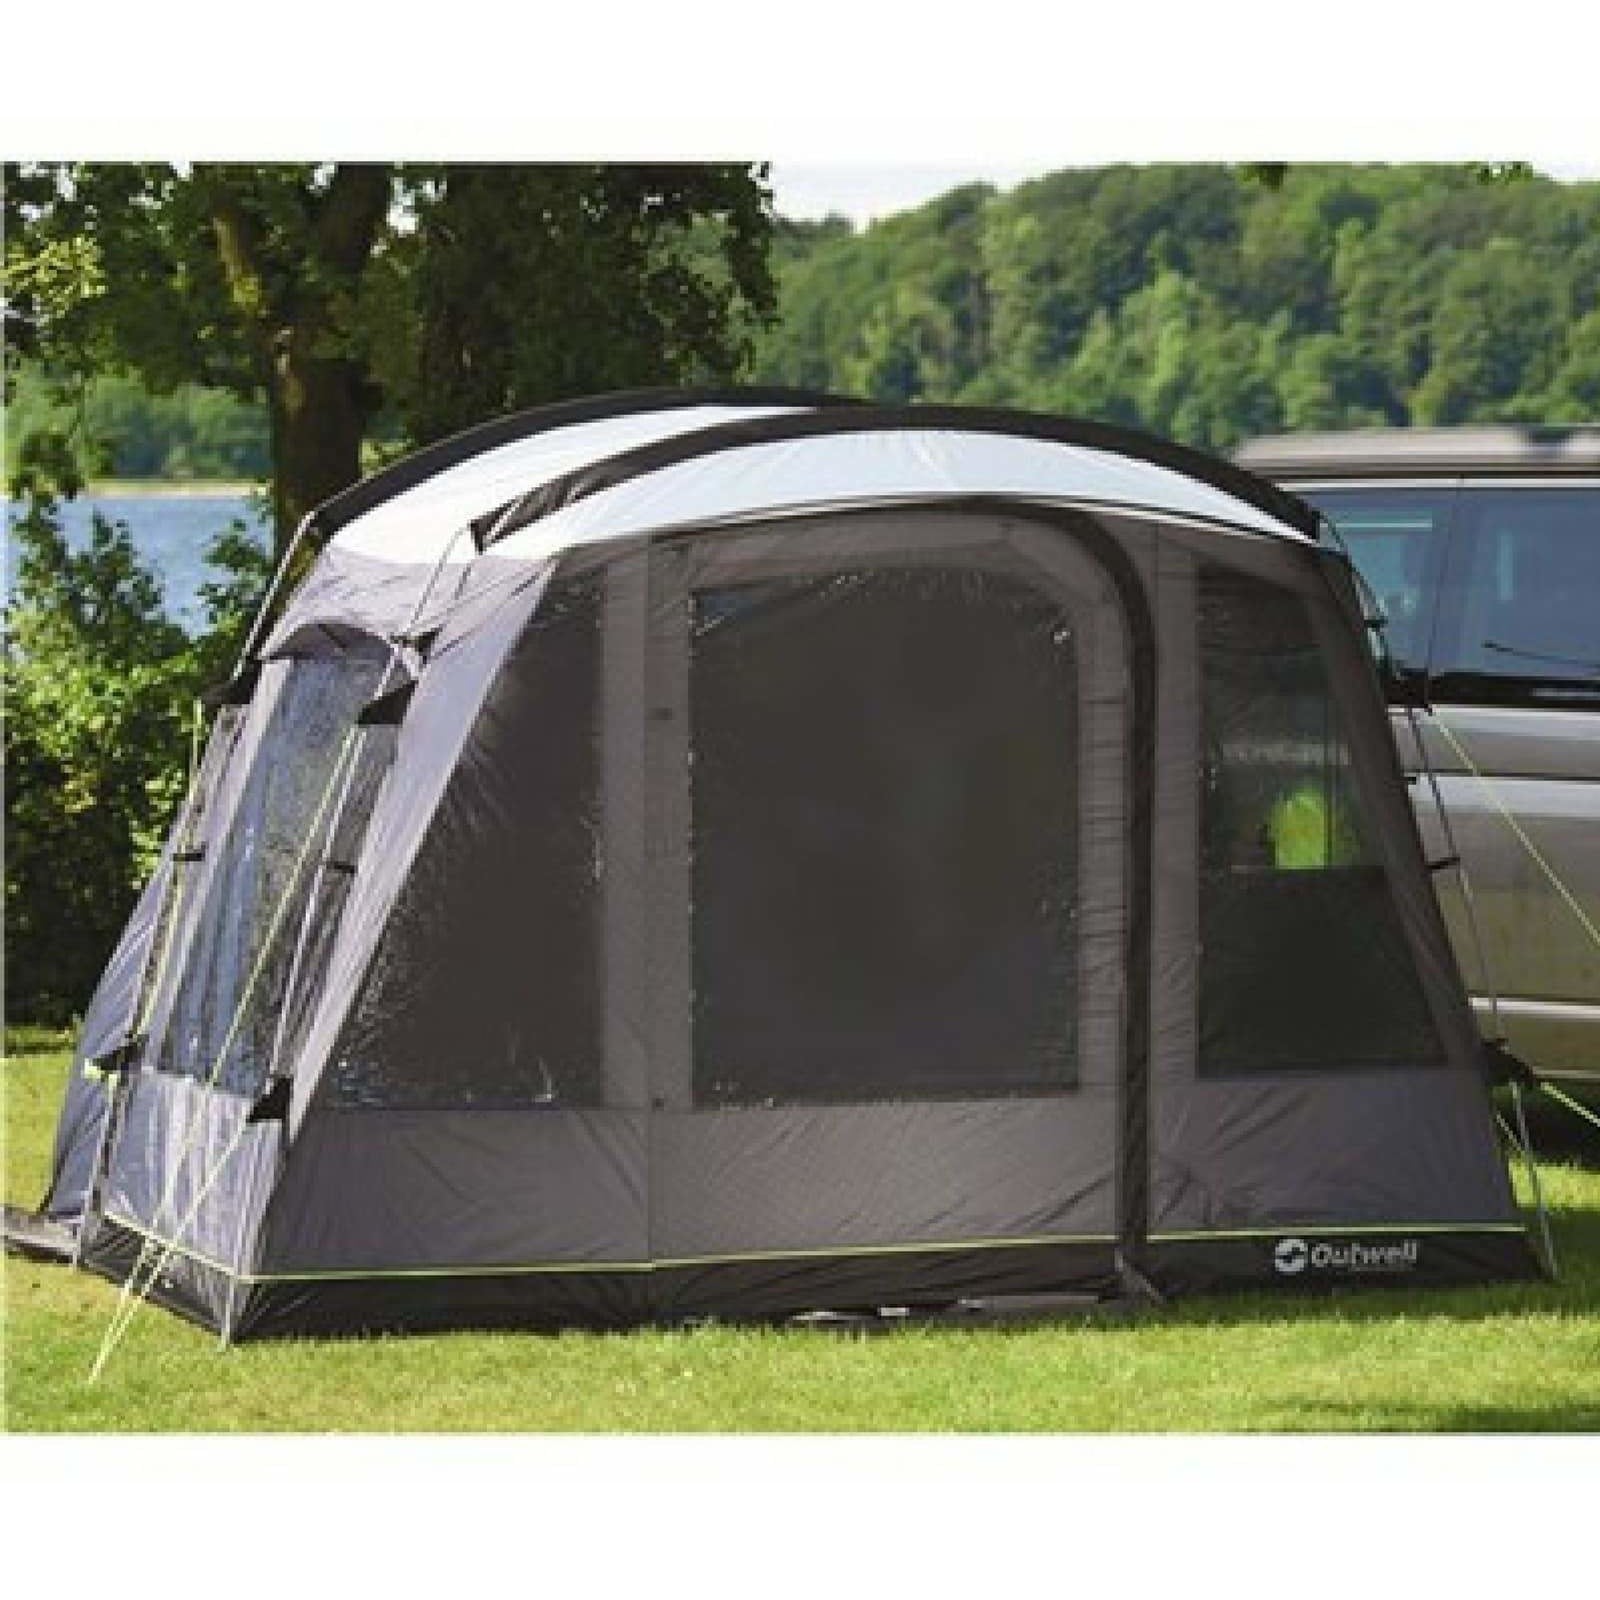 Outwell Darlington Cruising Driveaway Awning 2018 Edition